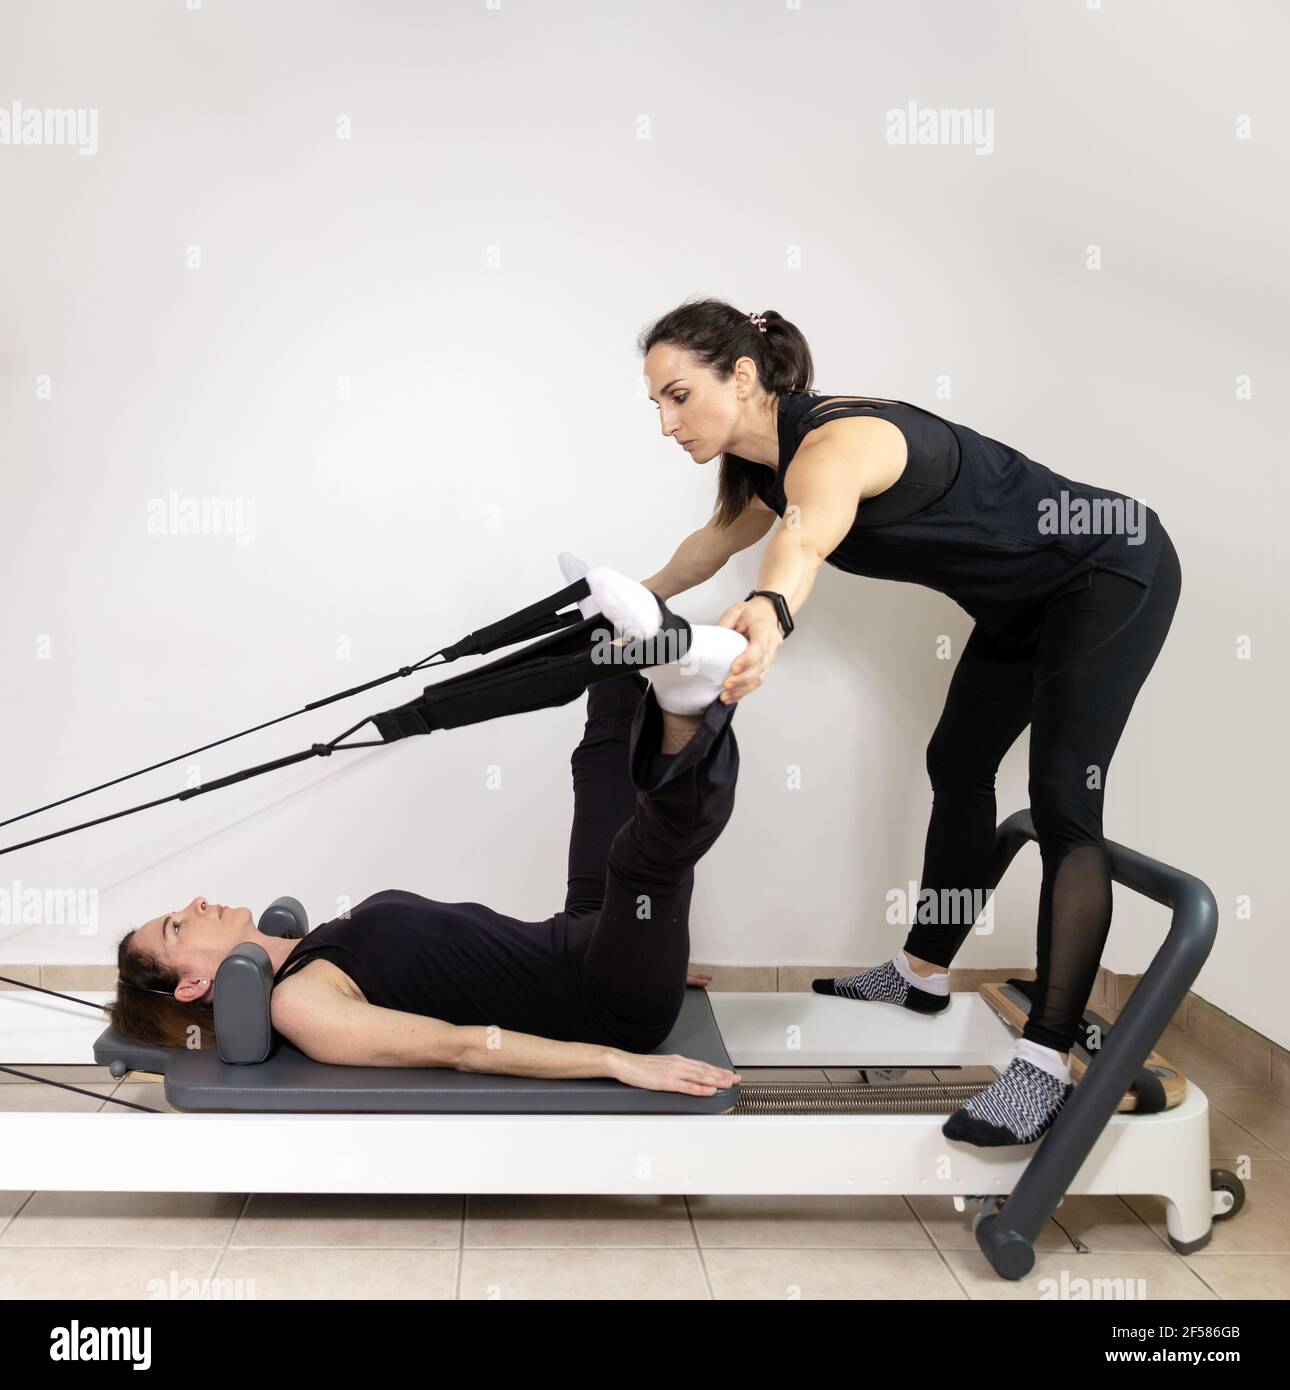 A woman practicing exercises with a pilates personal trainer. Stock Photo